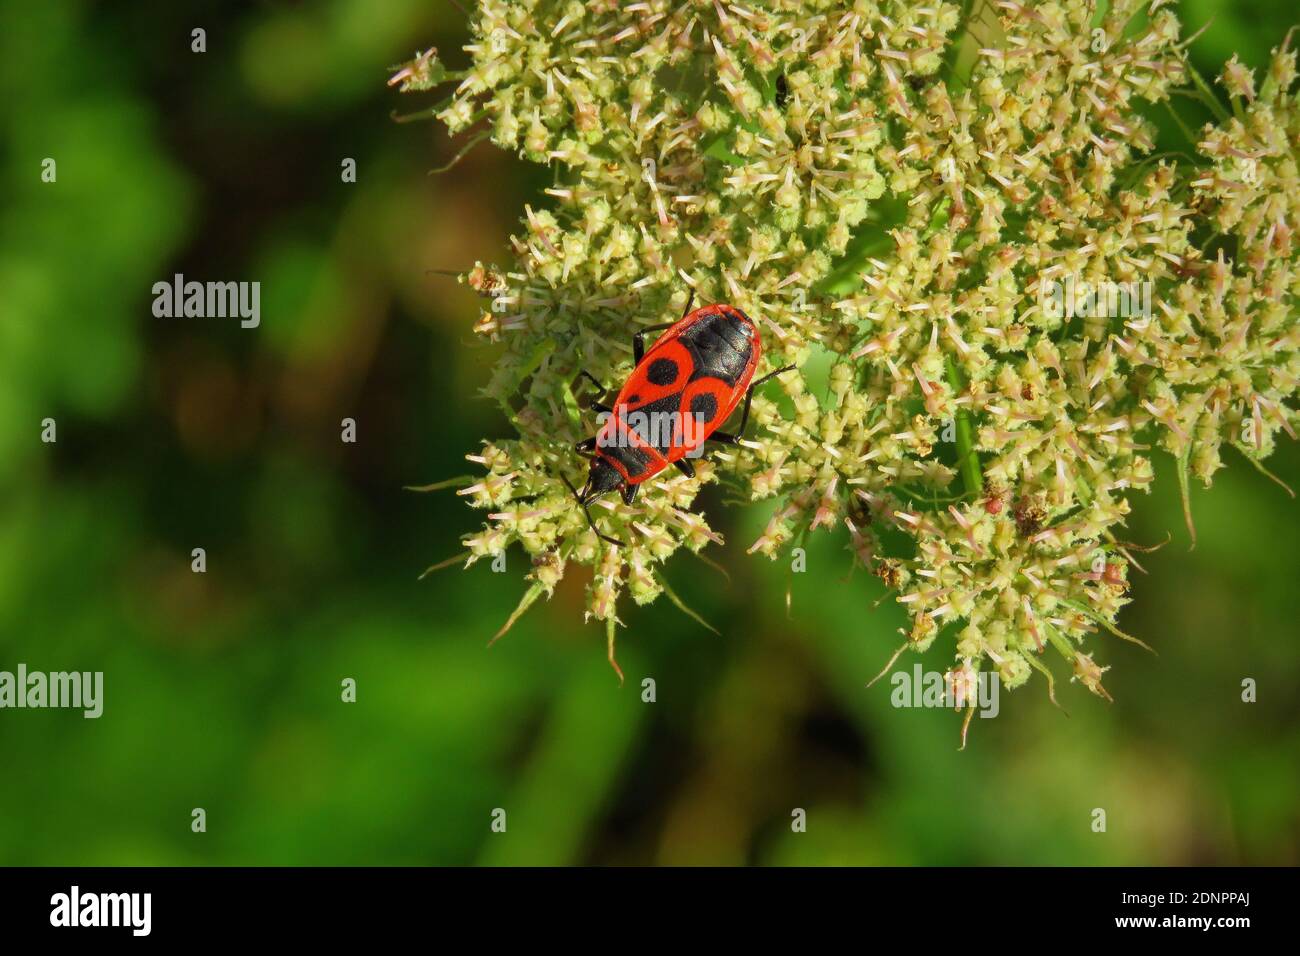 Close-up Of Red Bug Pollinating On Flower Stock Photo